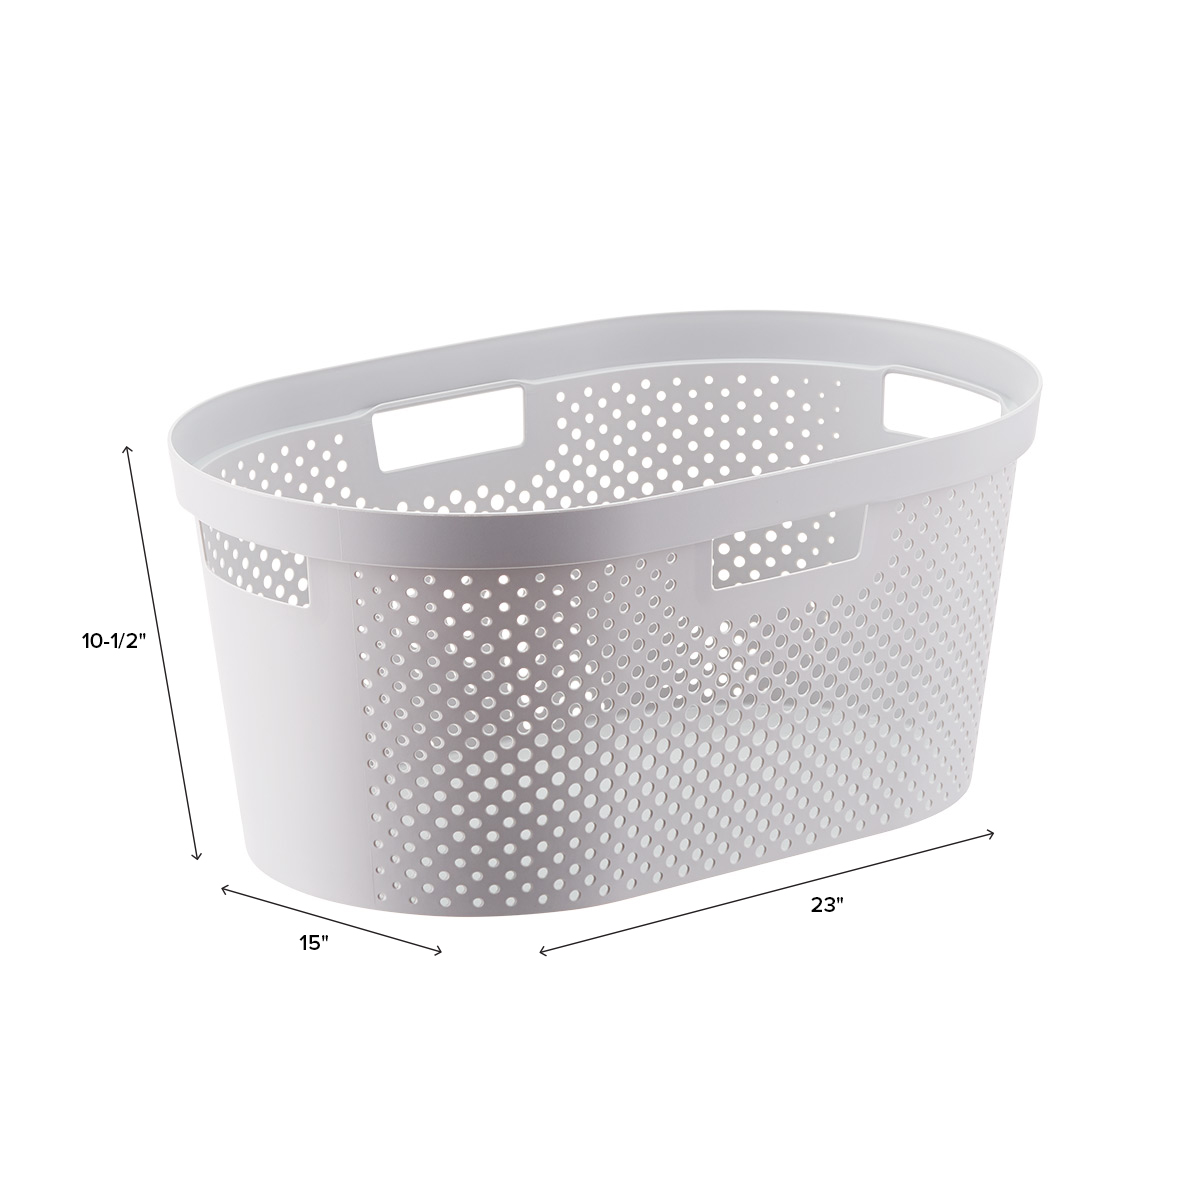 Infinity Laundry Basket | The Container Store